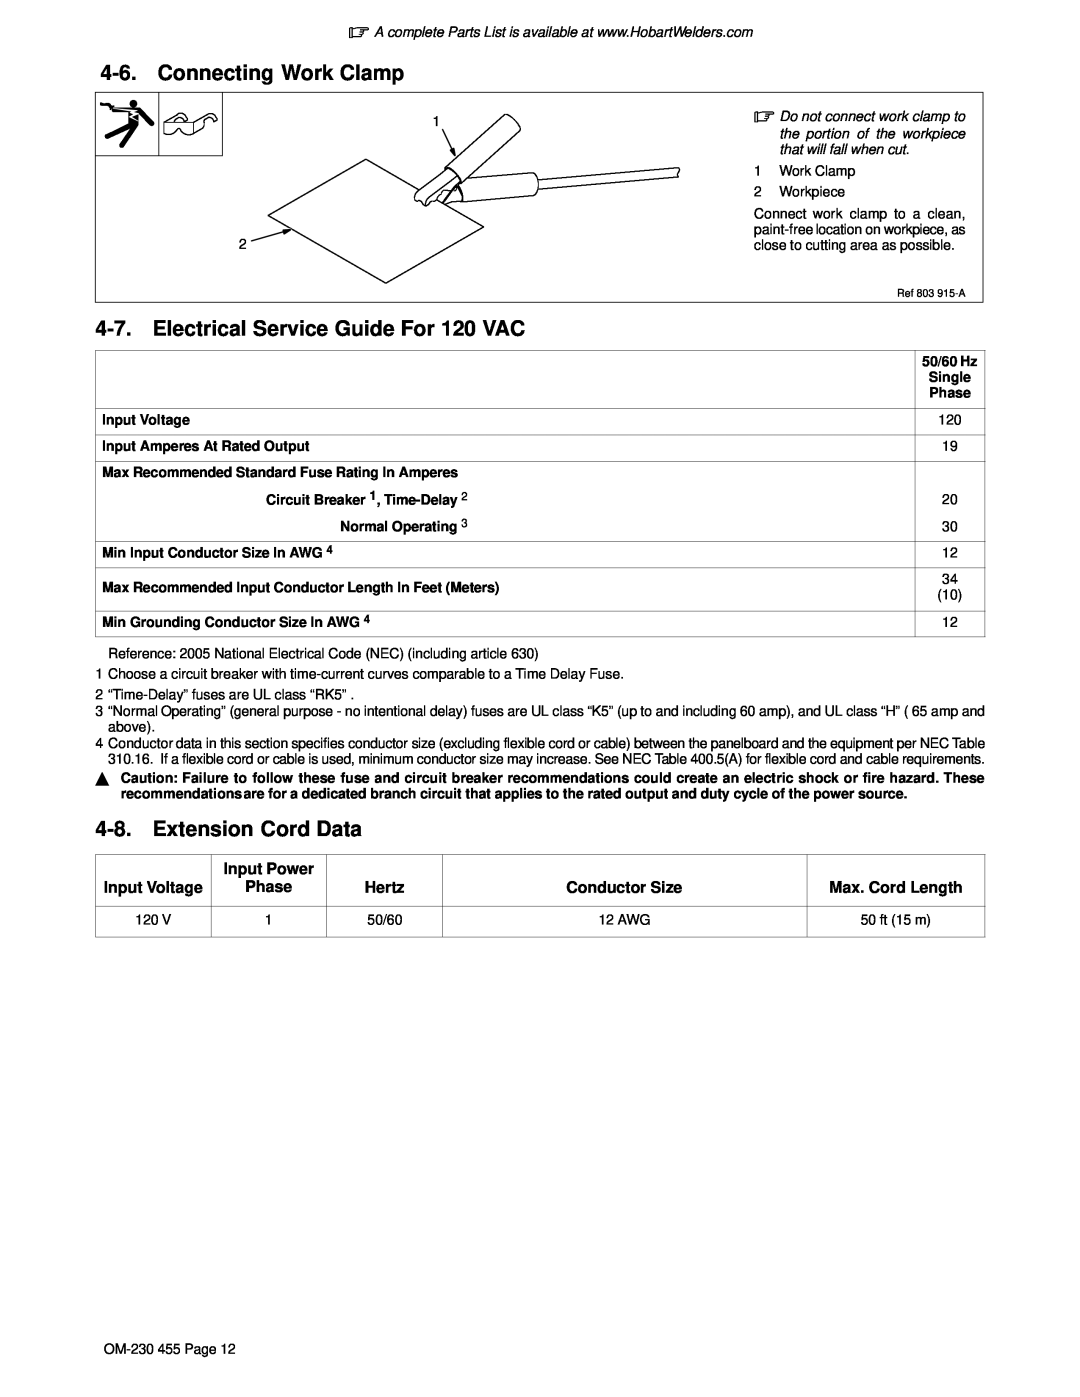 Hobart Welding Products OM-230 455D manual Connecting Work Clamp, Electrical Service Guide For 120 VAC, Extension Cord Data 